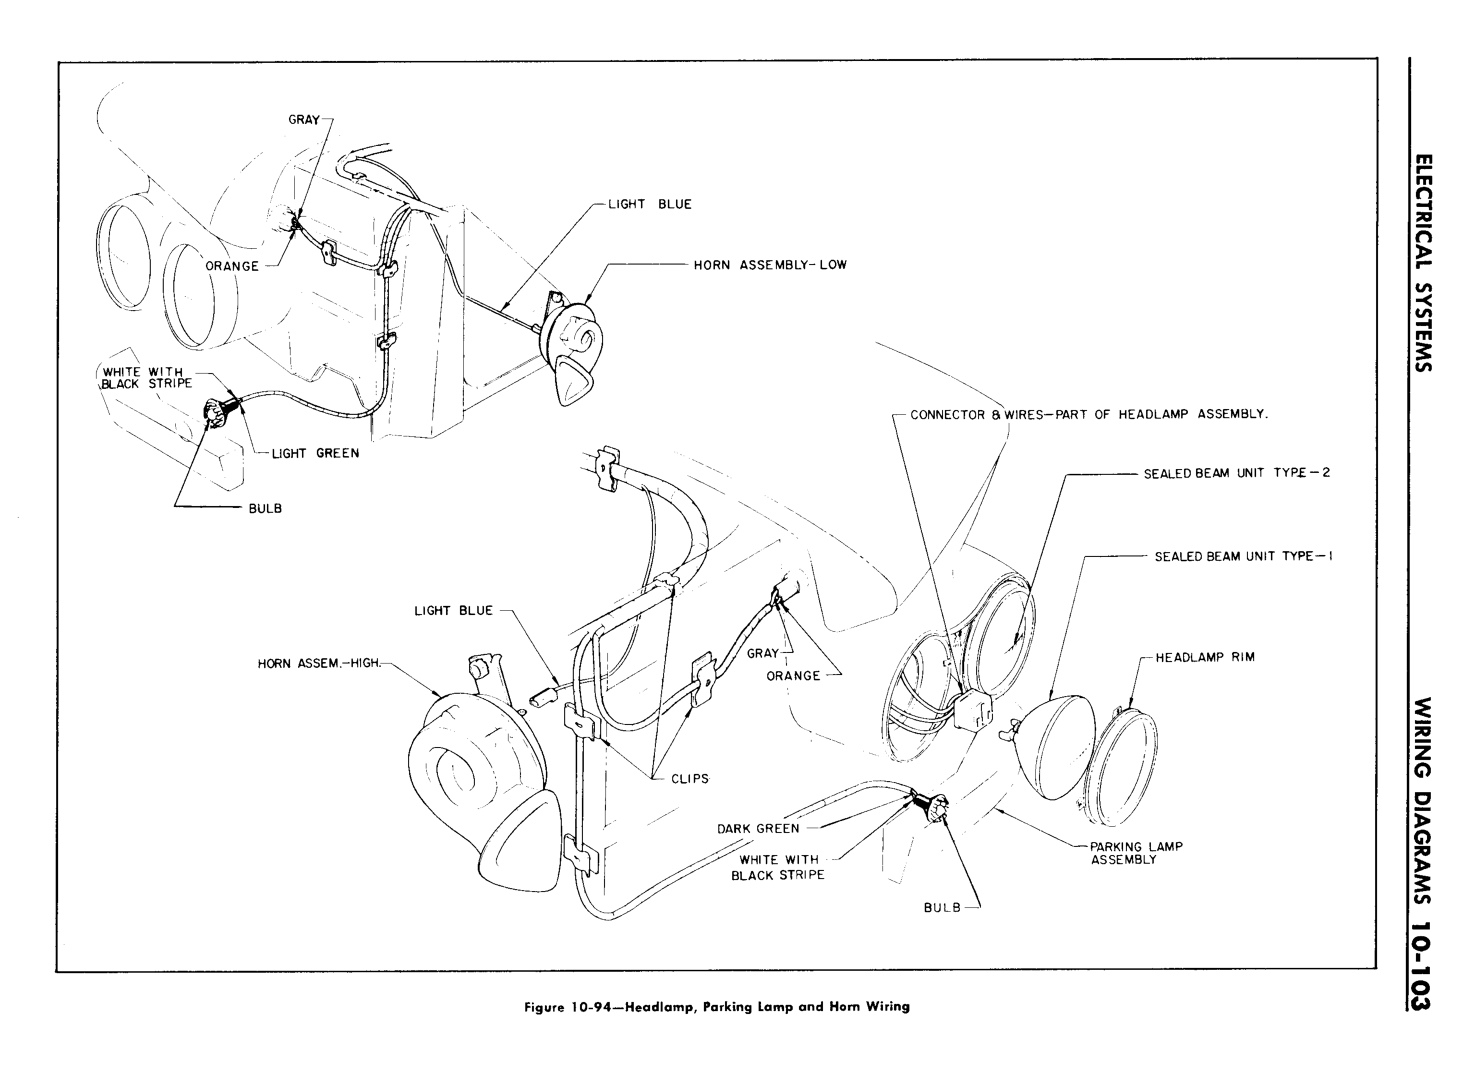 n_11 1960 Buick Shop Manual - Electrical Systems-103-103.jpg